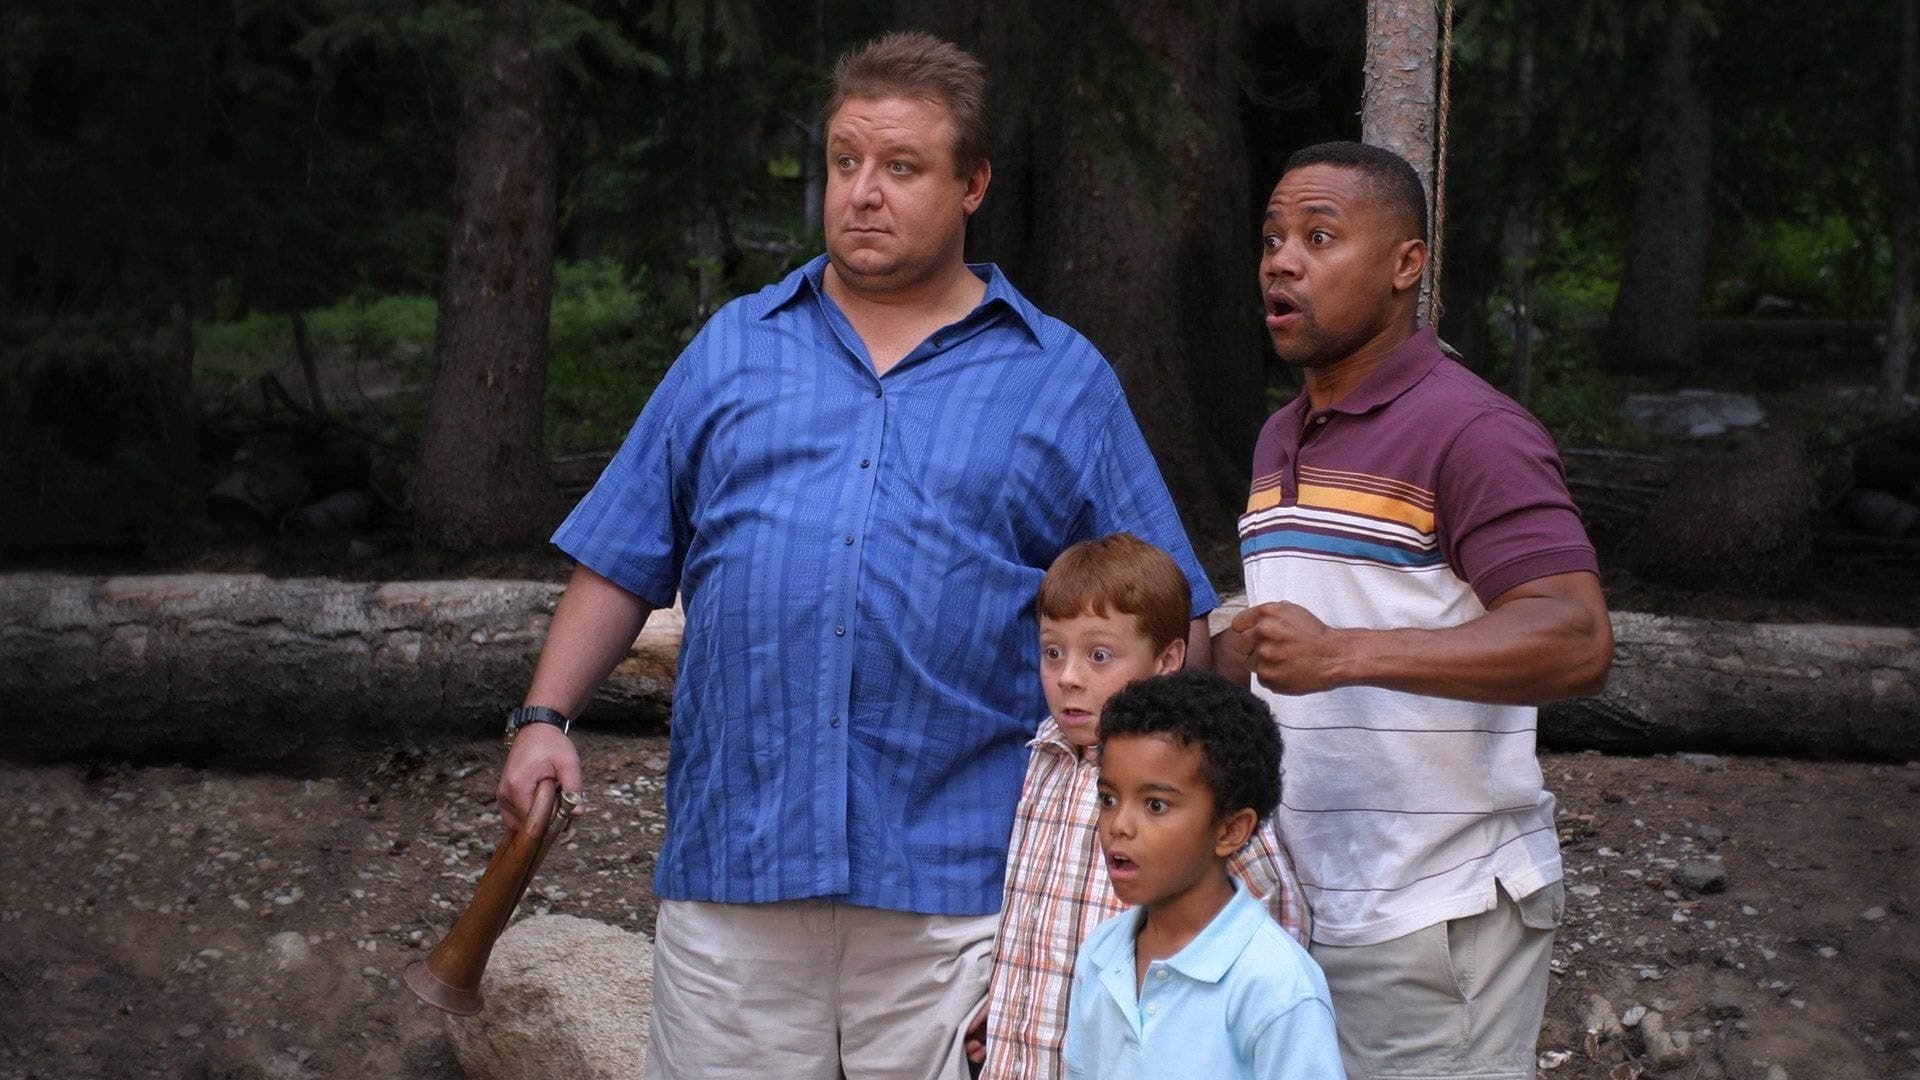 Daddy Day Camp (2007)